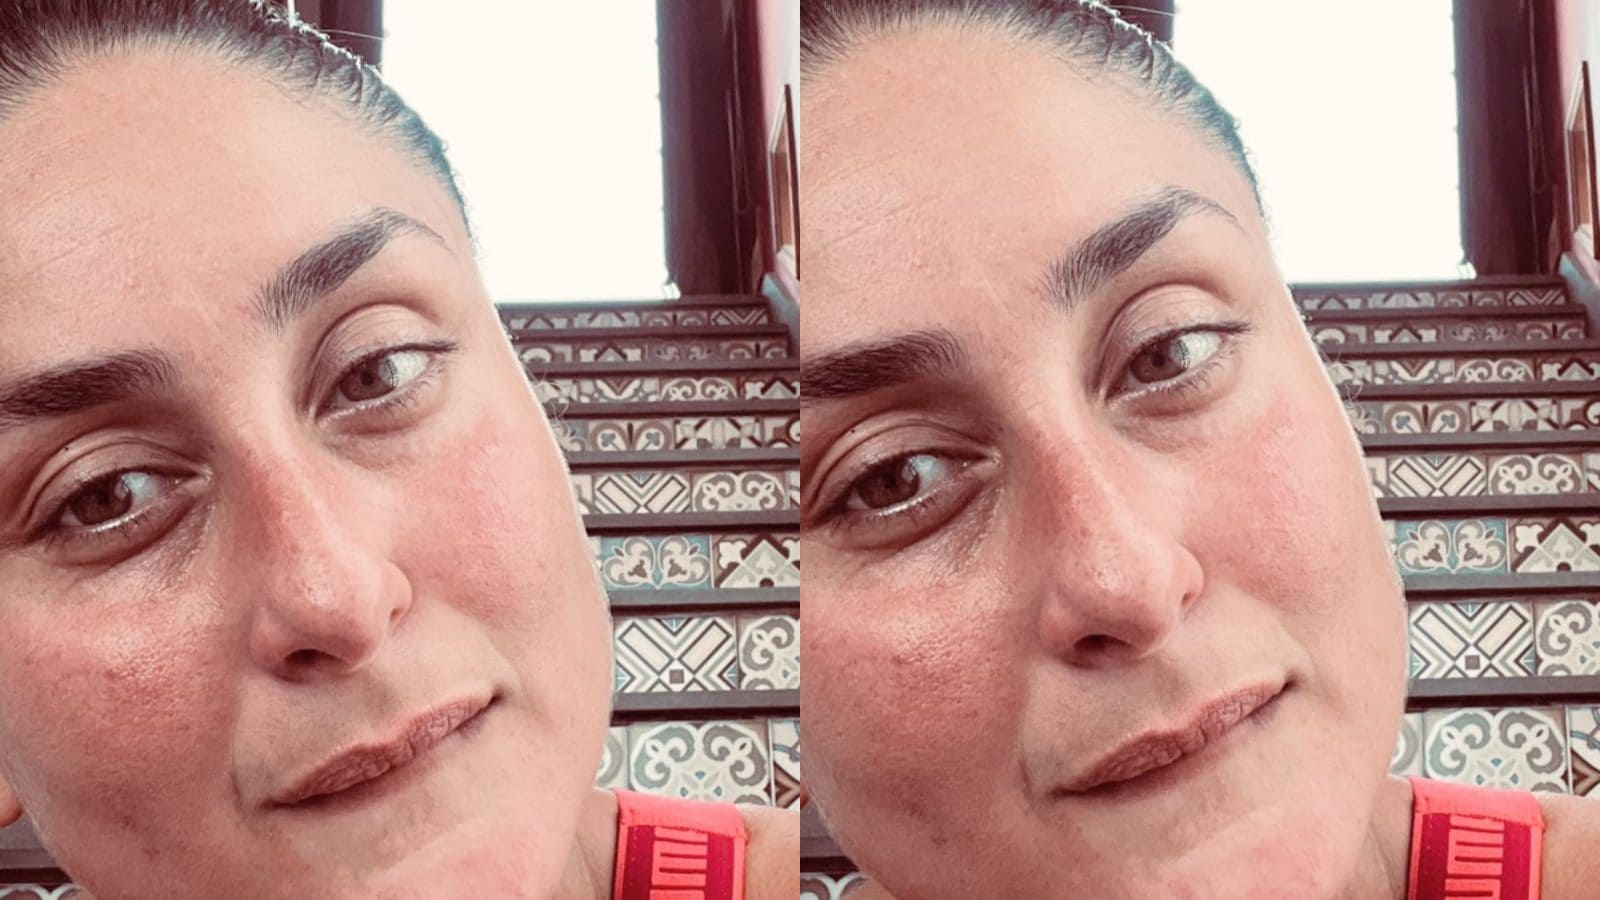 Hardcor Xxx Kareena Videos - Kareena Kapoor Khan Looks Exquisite In Latest Pic As She Shows The  'Stairway To Her Heart'